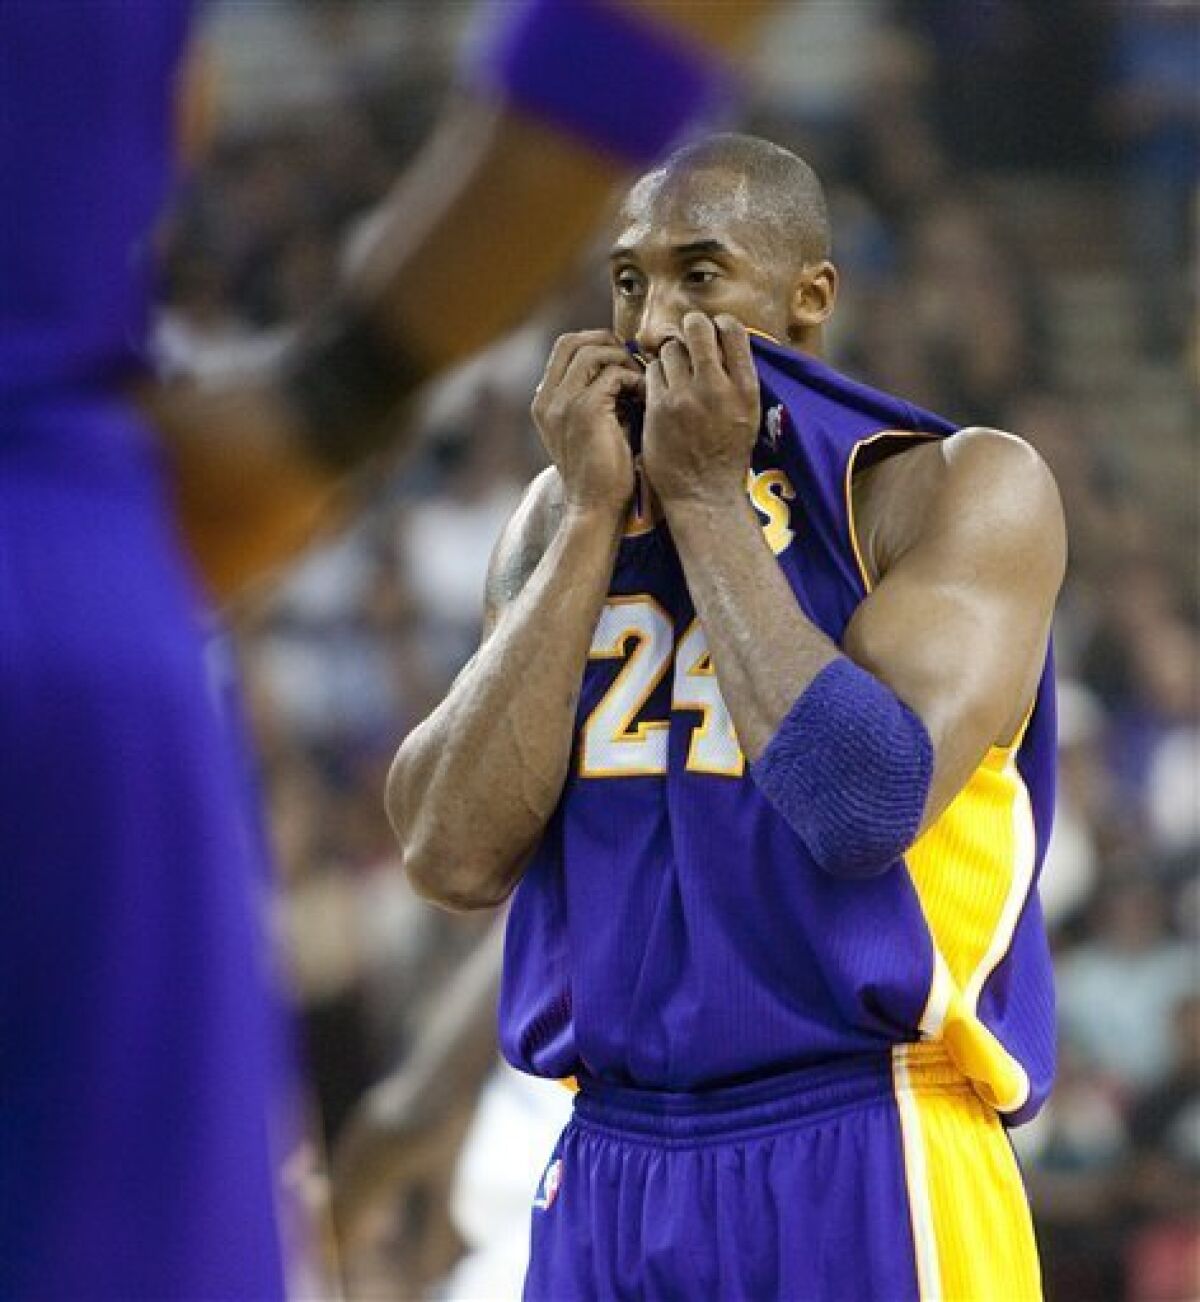 Los Angeles Lakers' Kobe Bryant prepares to shoot a free throw in the first half against the Sacramento Kings in Sacramento, Calif., Nov. 3, 2010. (AP Photo/Robert Durell)